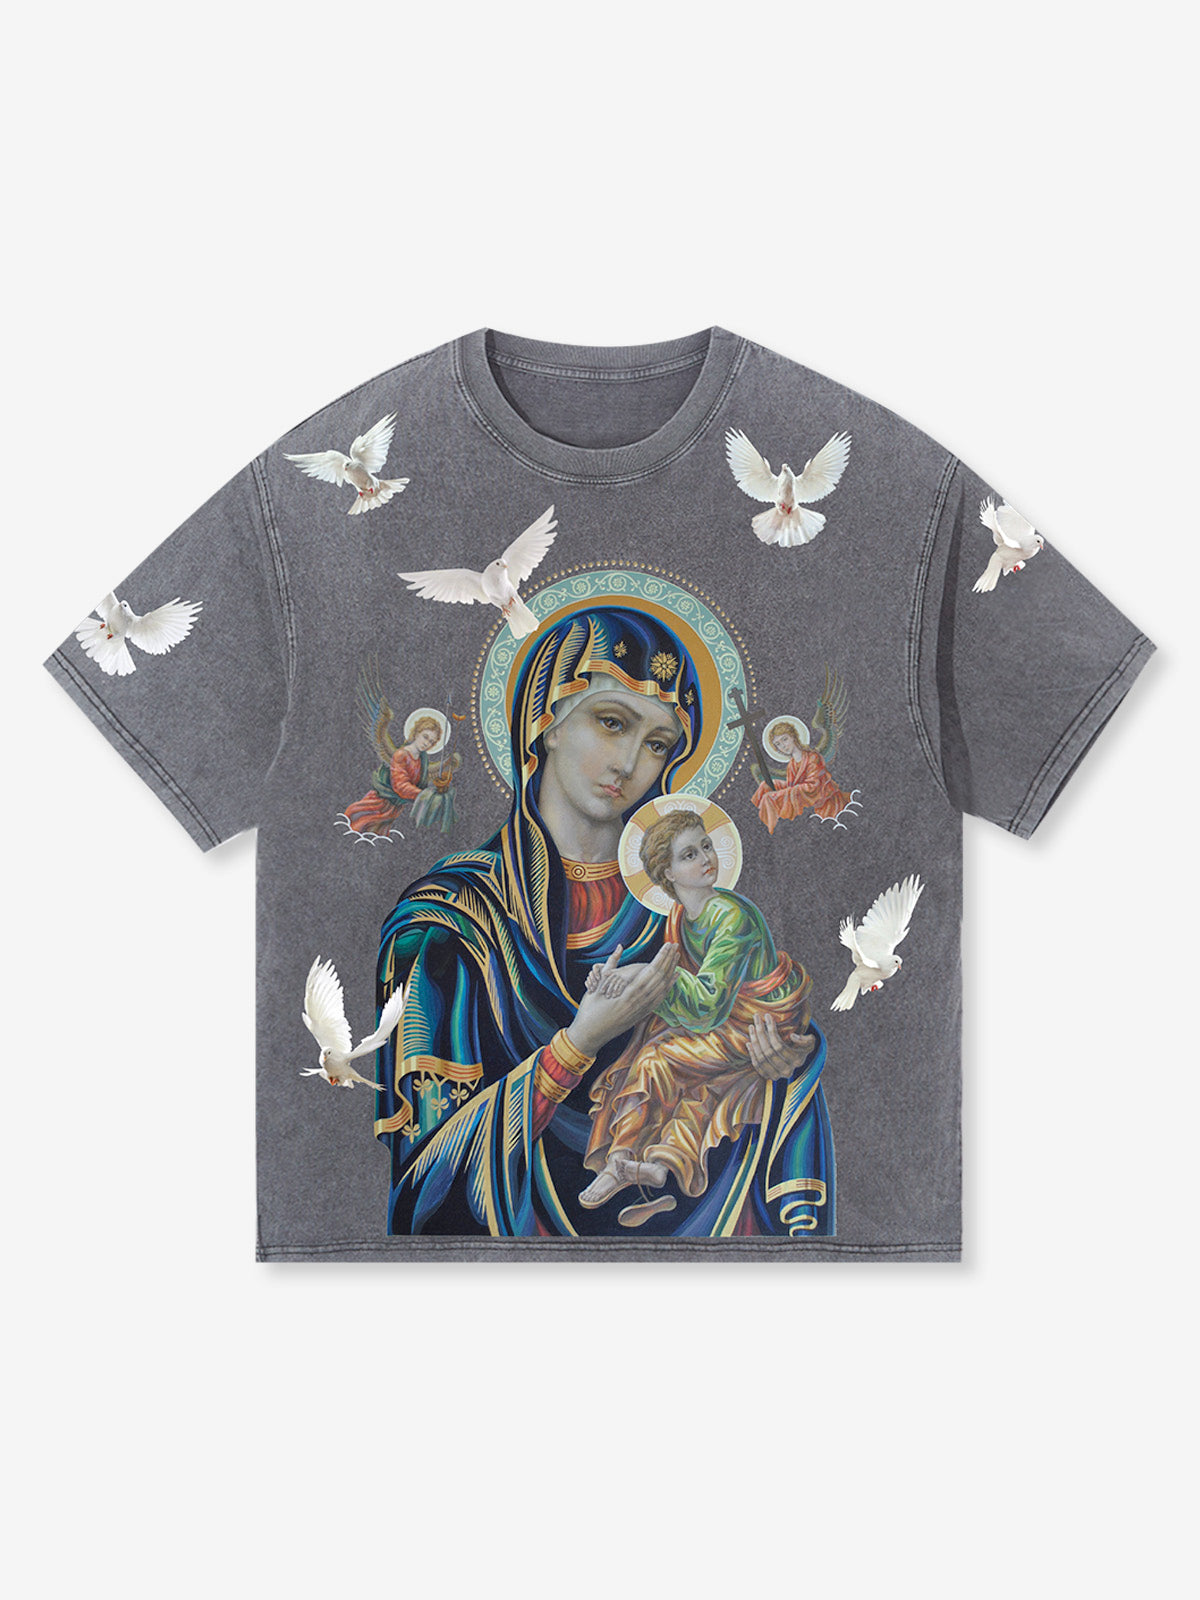 OBSTACLES & DANGERS© Madonna and Child T-SHIRT Available in 7 Colors